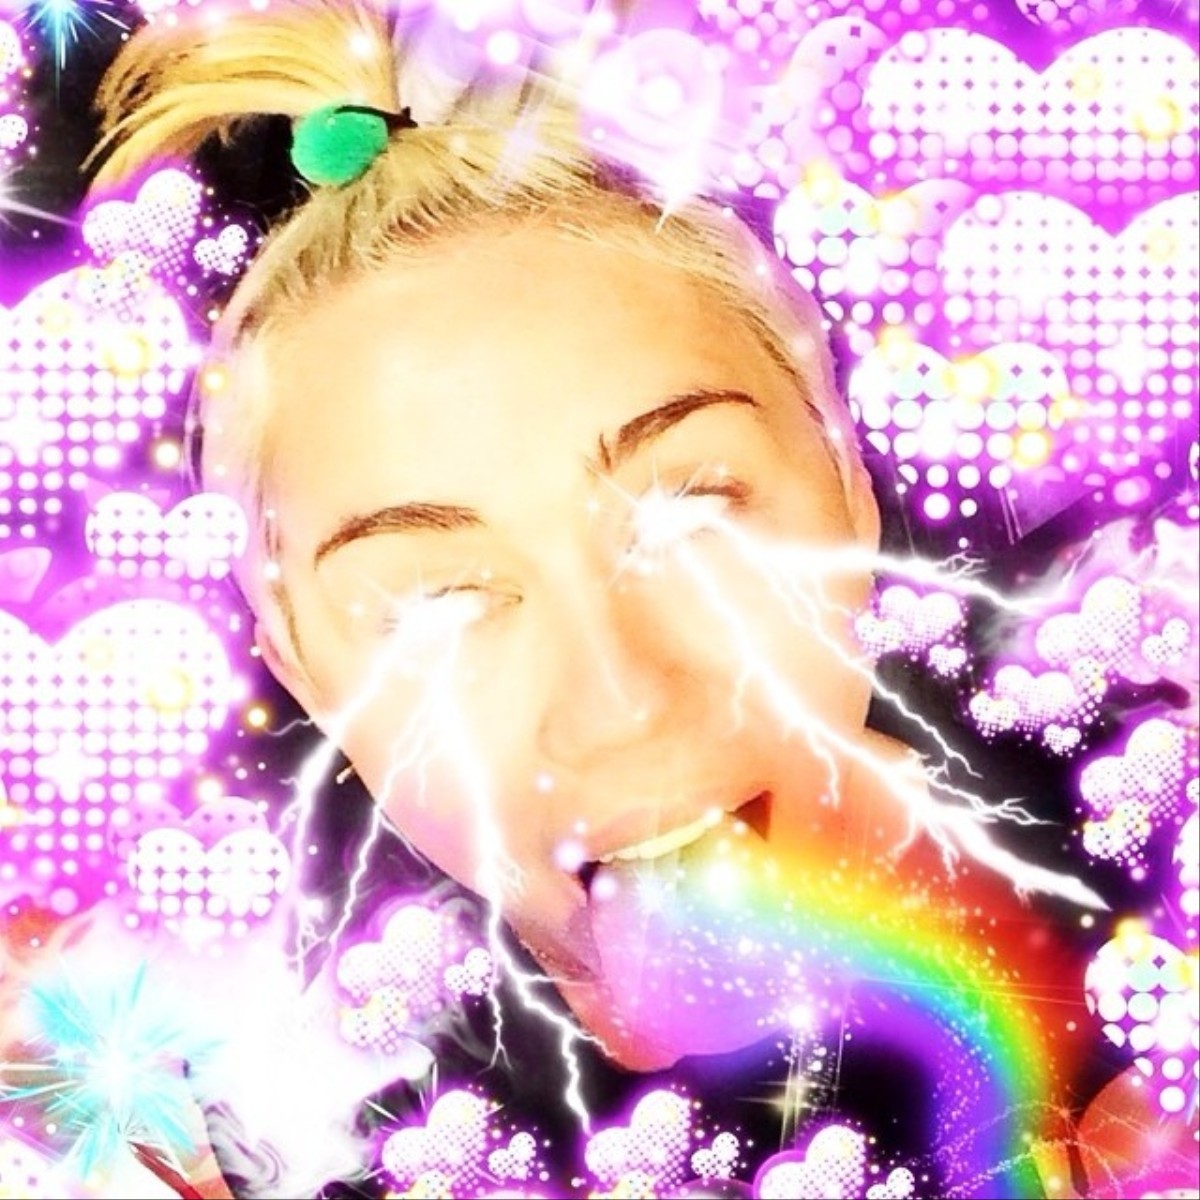 Ass Cock Miley Cyrus - Miley Cyrus' Instagram Account Is Better Than a Million Art Museums Combined